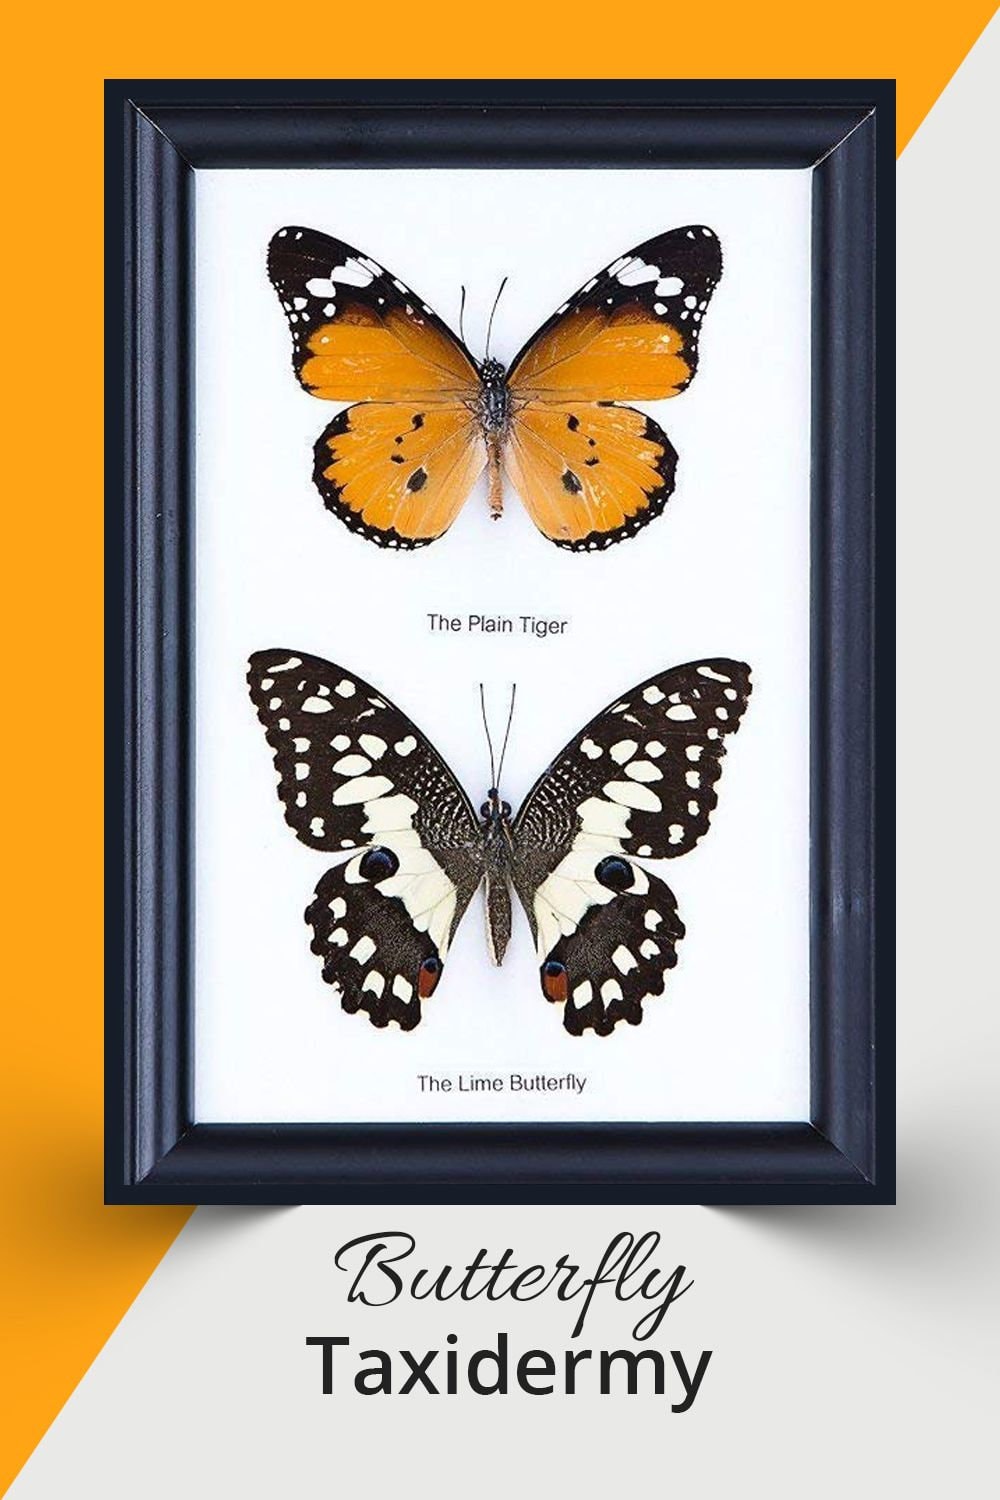 2 Butterflies Framed | Ethical Butterfly Specimens Mounted Under Glass in a Wall Hanging Frame 7 x 5 In. Gift Boxed